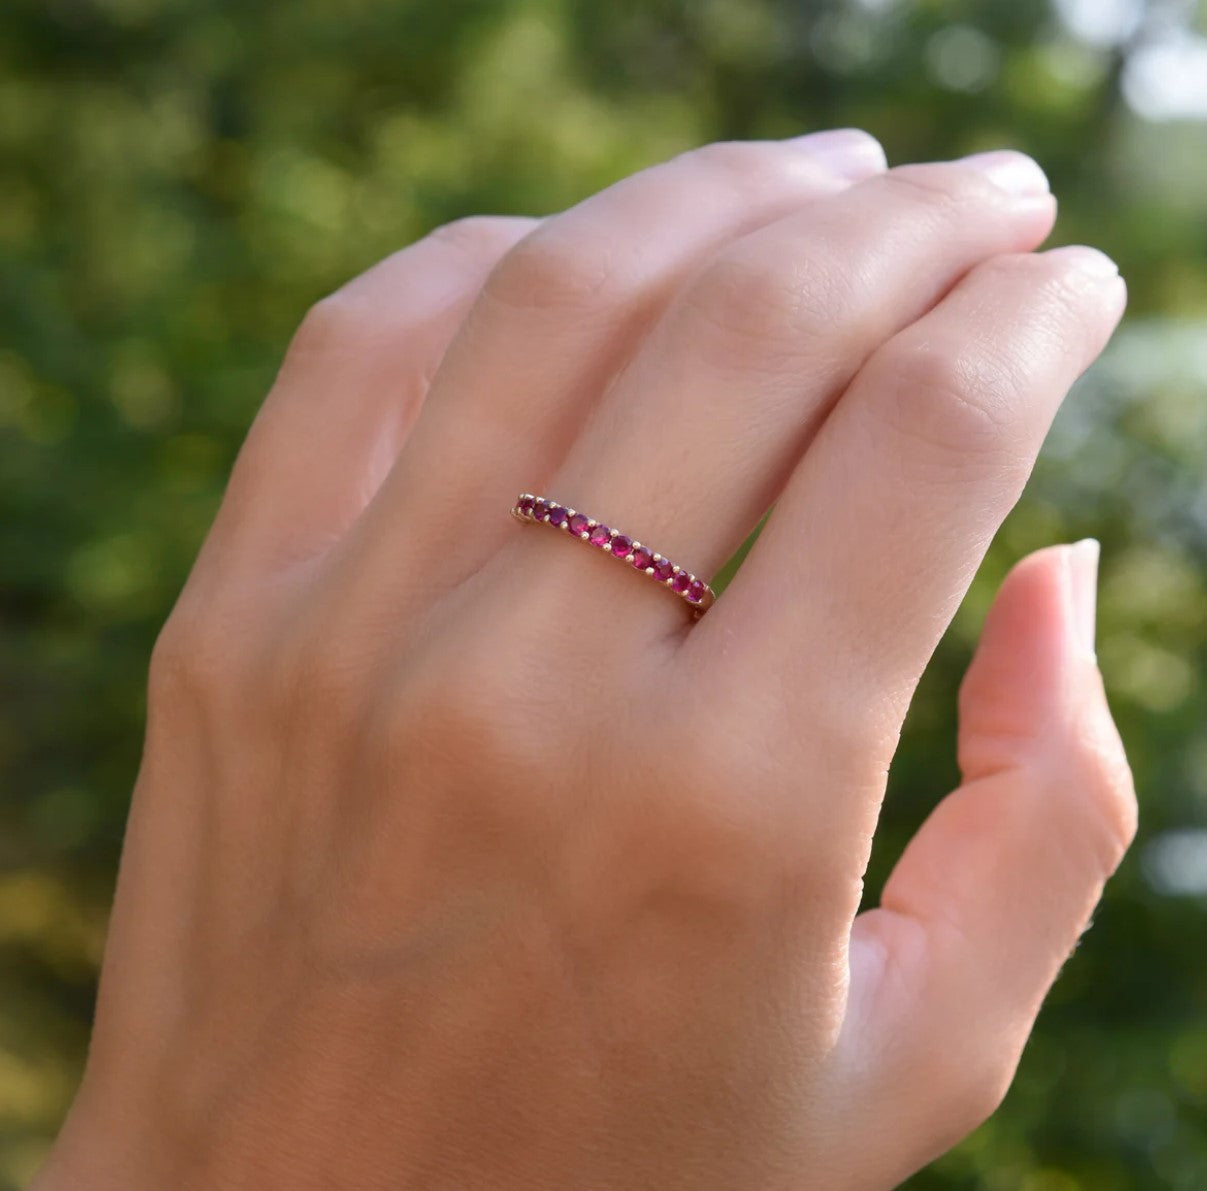 14K White Gold Pink Sapphire Eternity Band